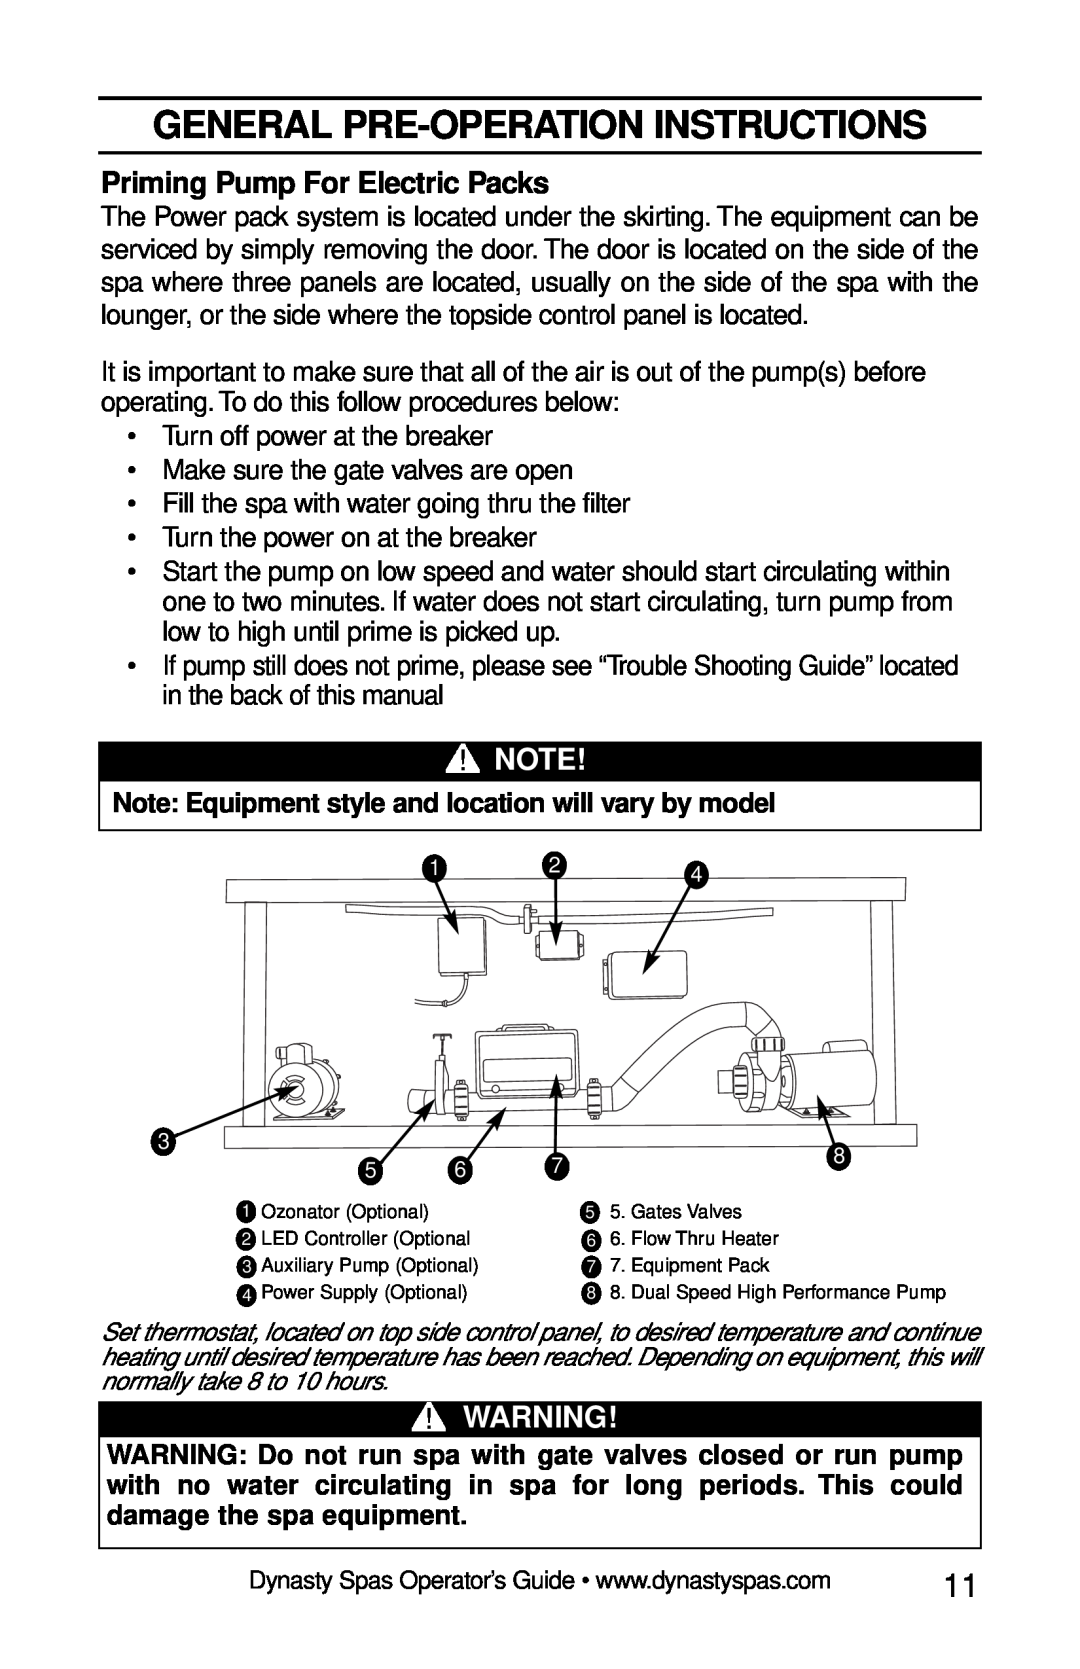 Dynasty Spas 2007 manual General Pre-Operationinstructions, Priming Pump For Electric Packs 